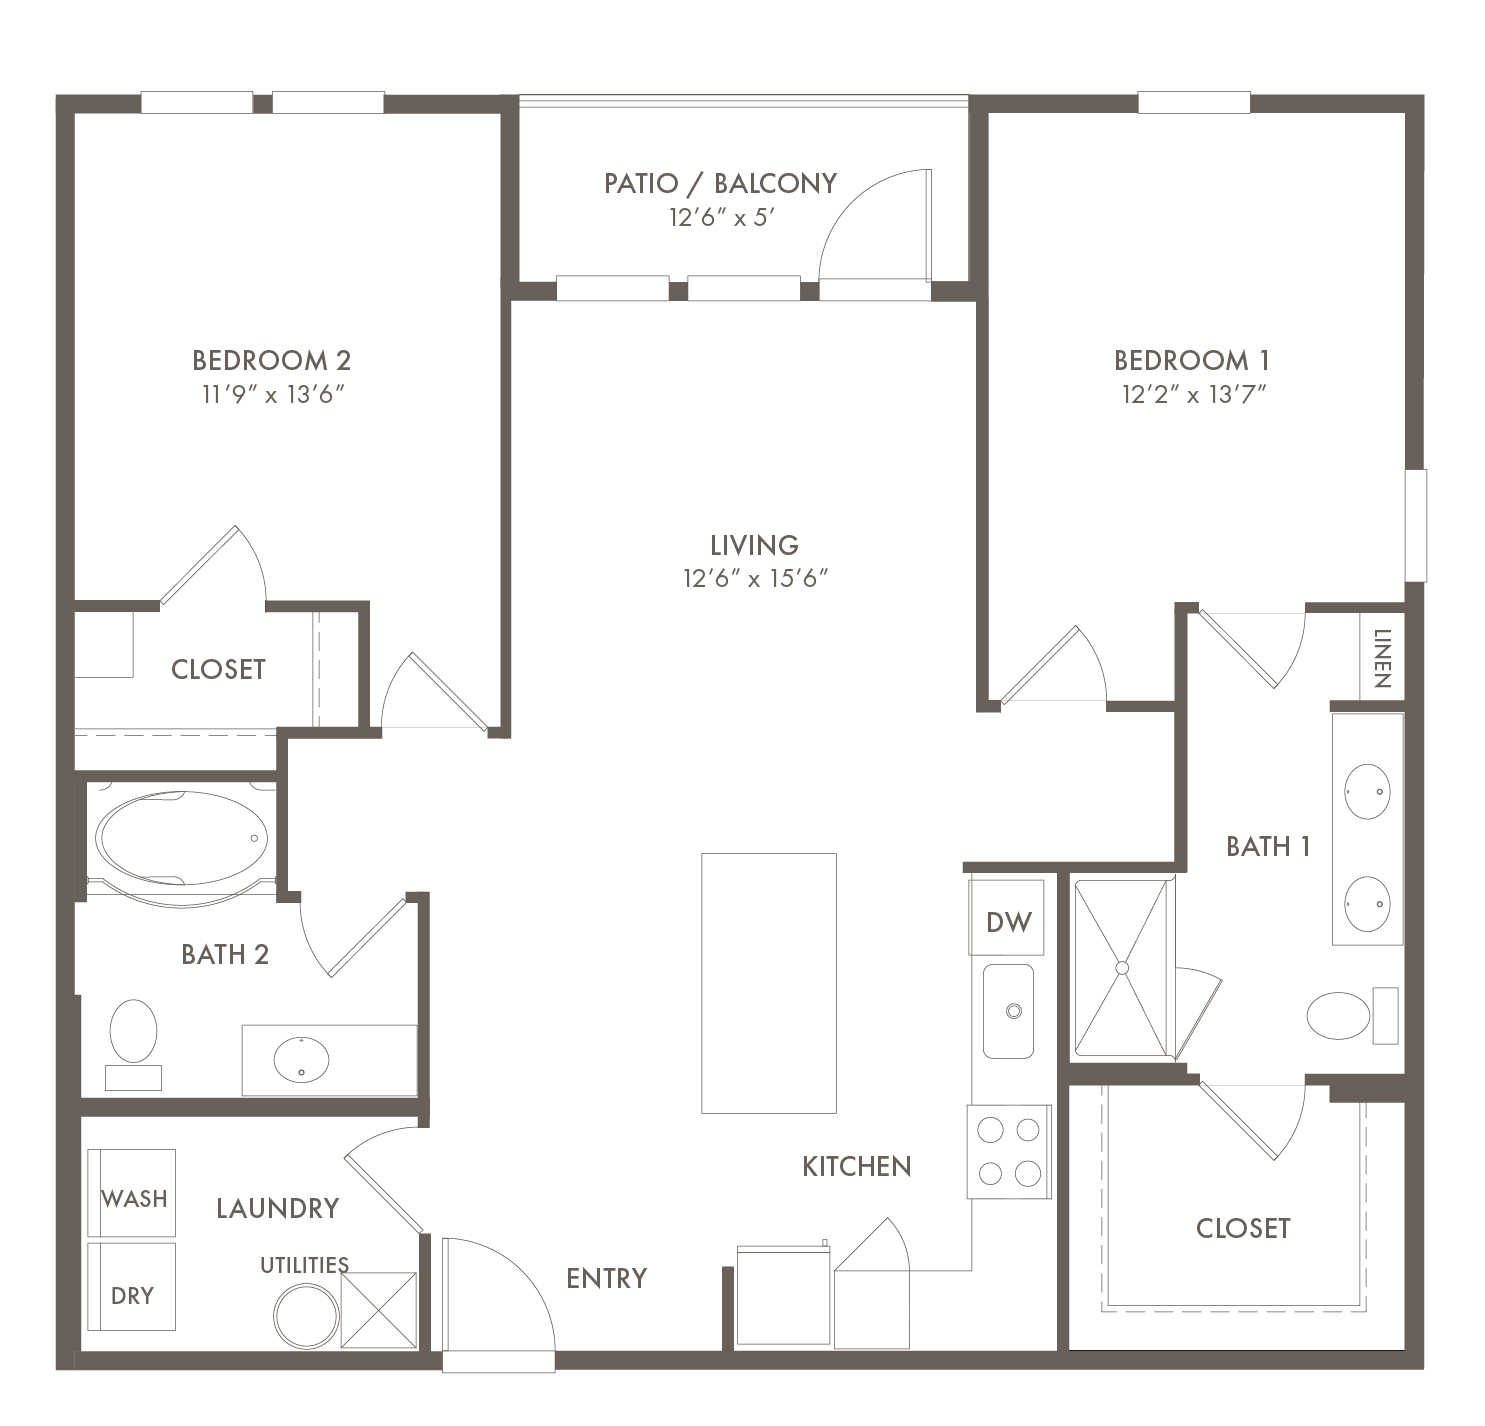 A B1C unit with 2 Bedrooms and 2 Bathrooms with area of 1176 sq. ft